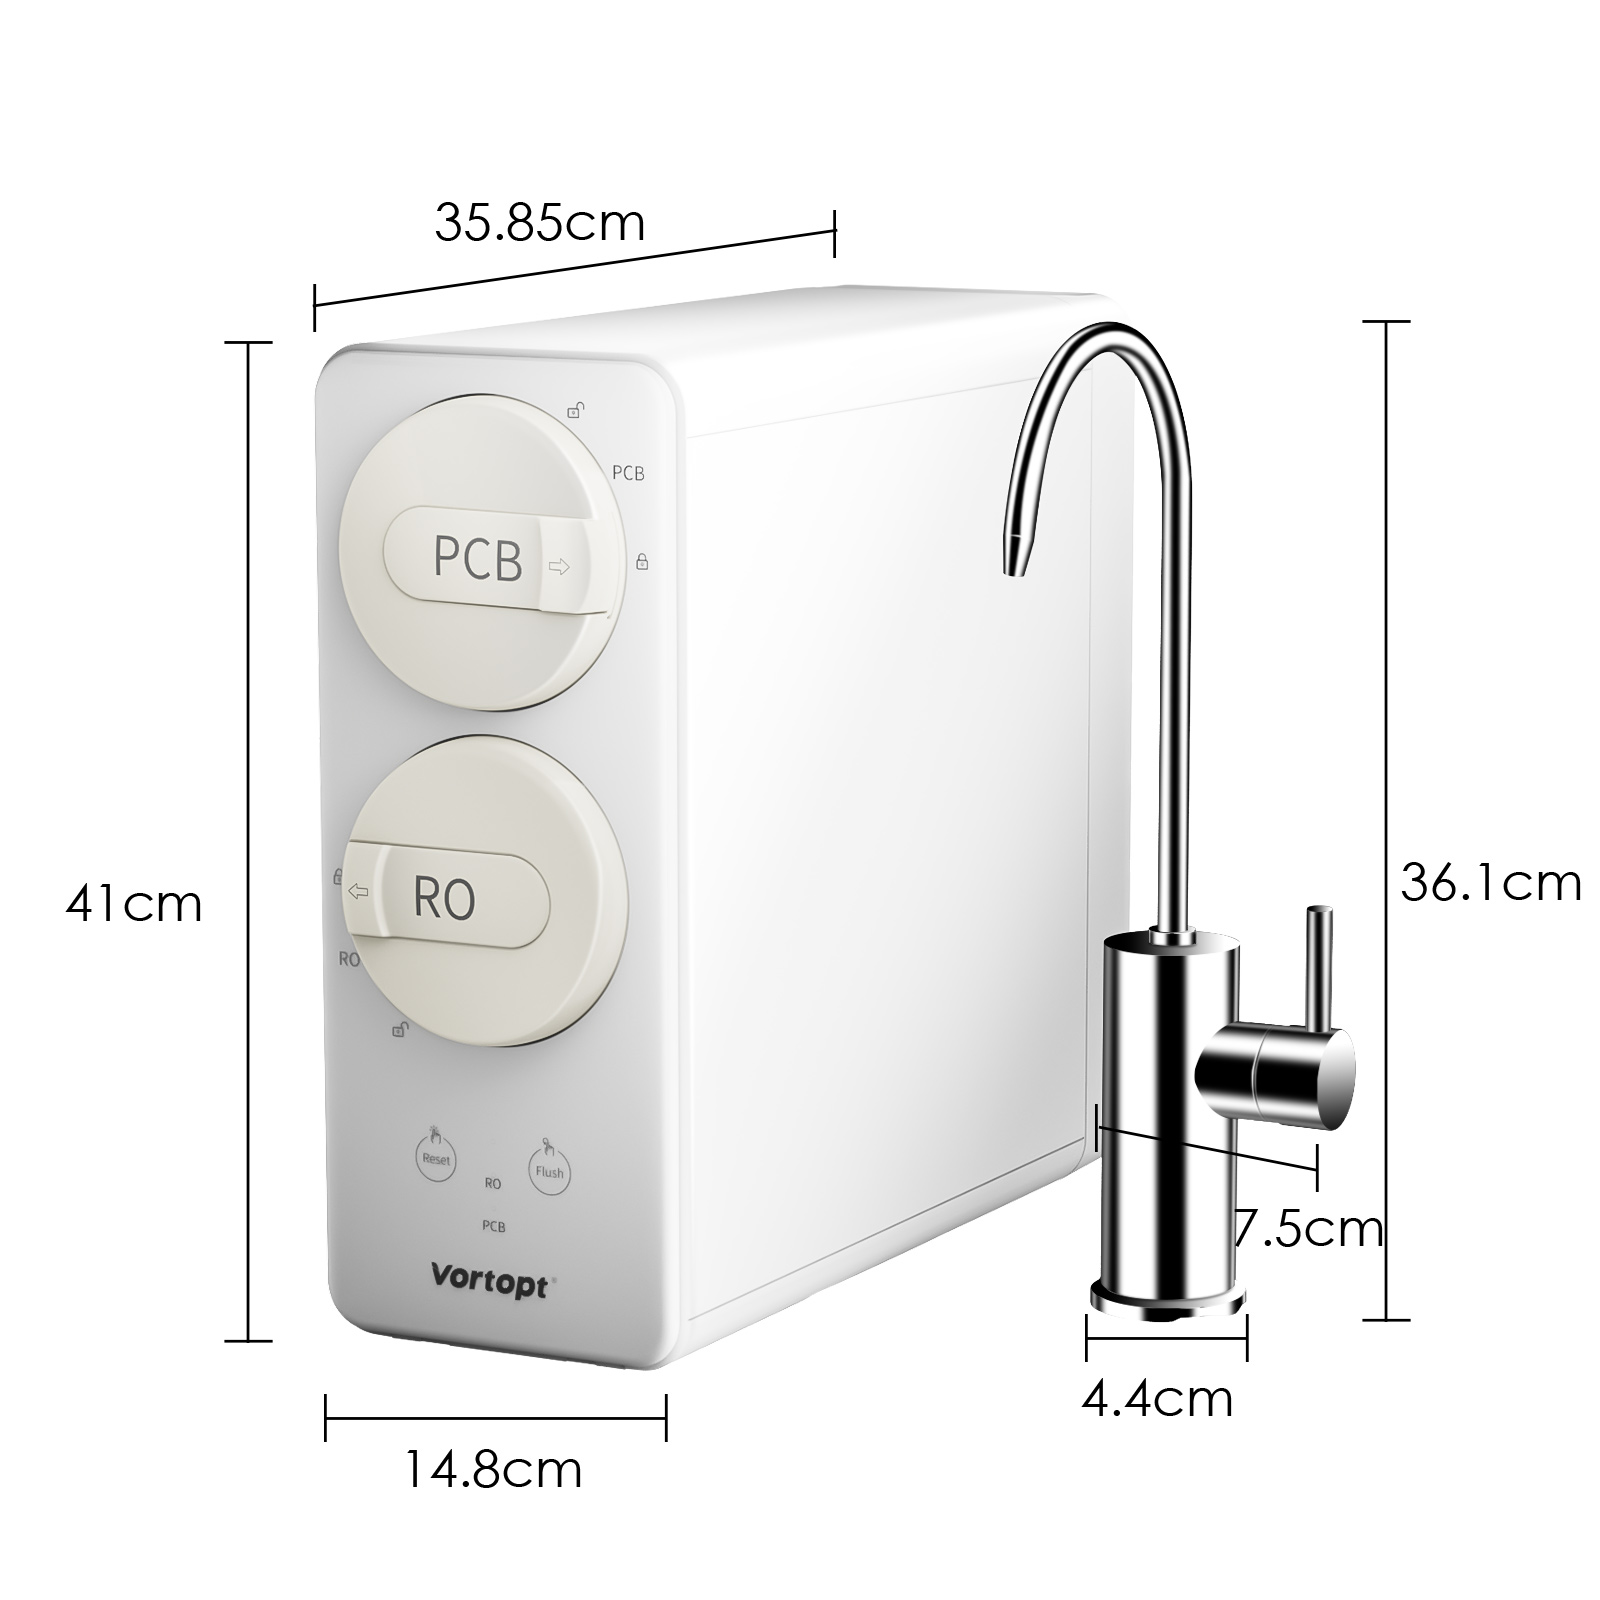 DR4 Under Sink Water Filter - 7 Stage Reverse Osmosis Water Filter System - 800 GPD Tankless RO Water Purifier System for Drinking Water, Vortopt 